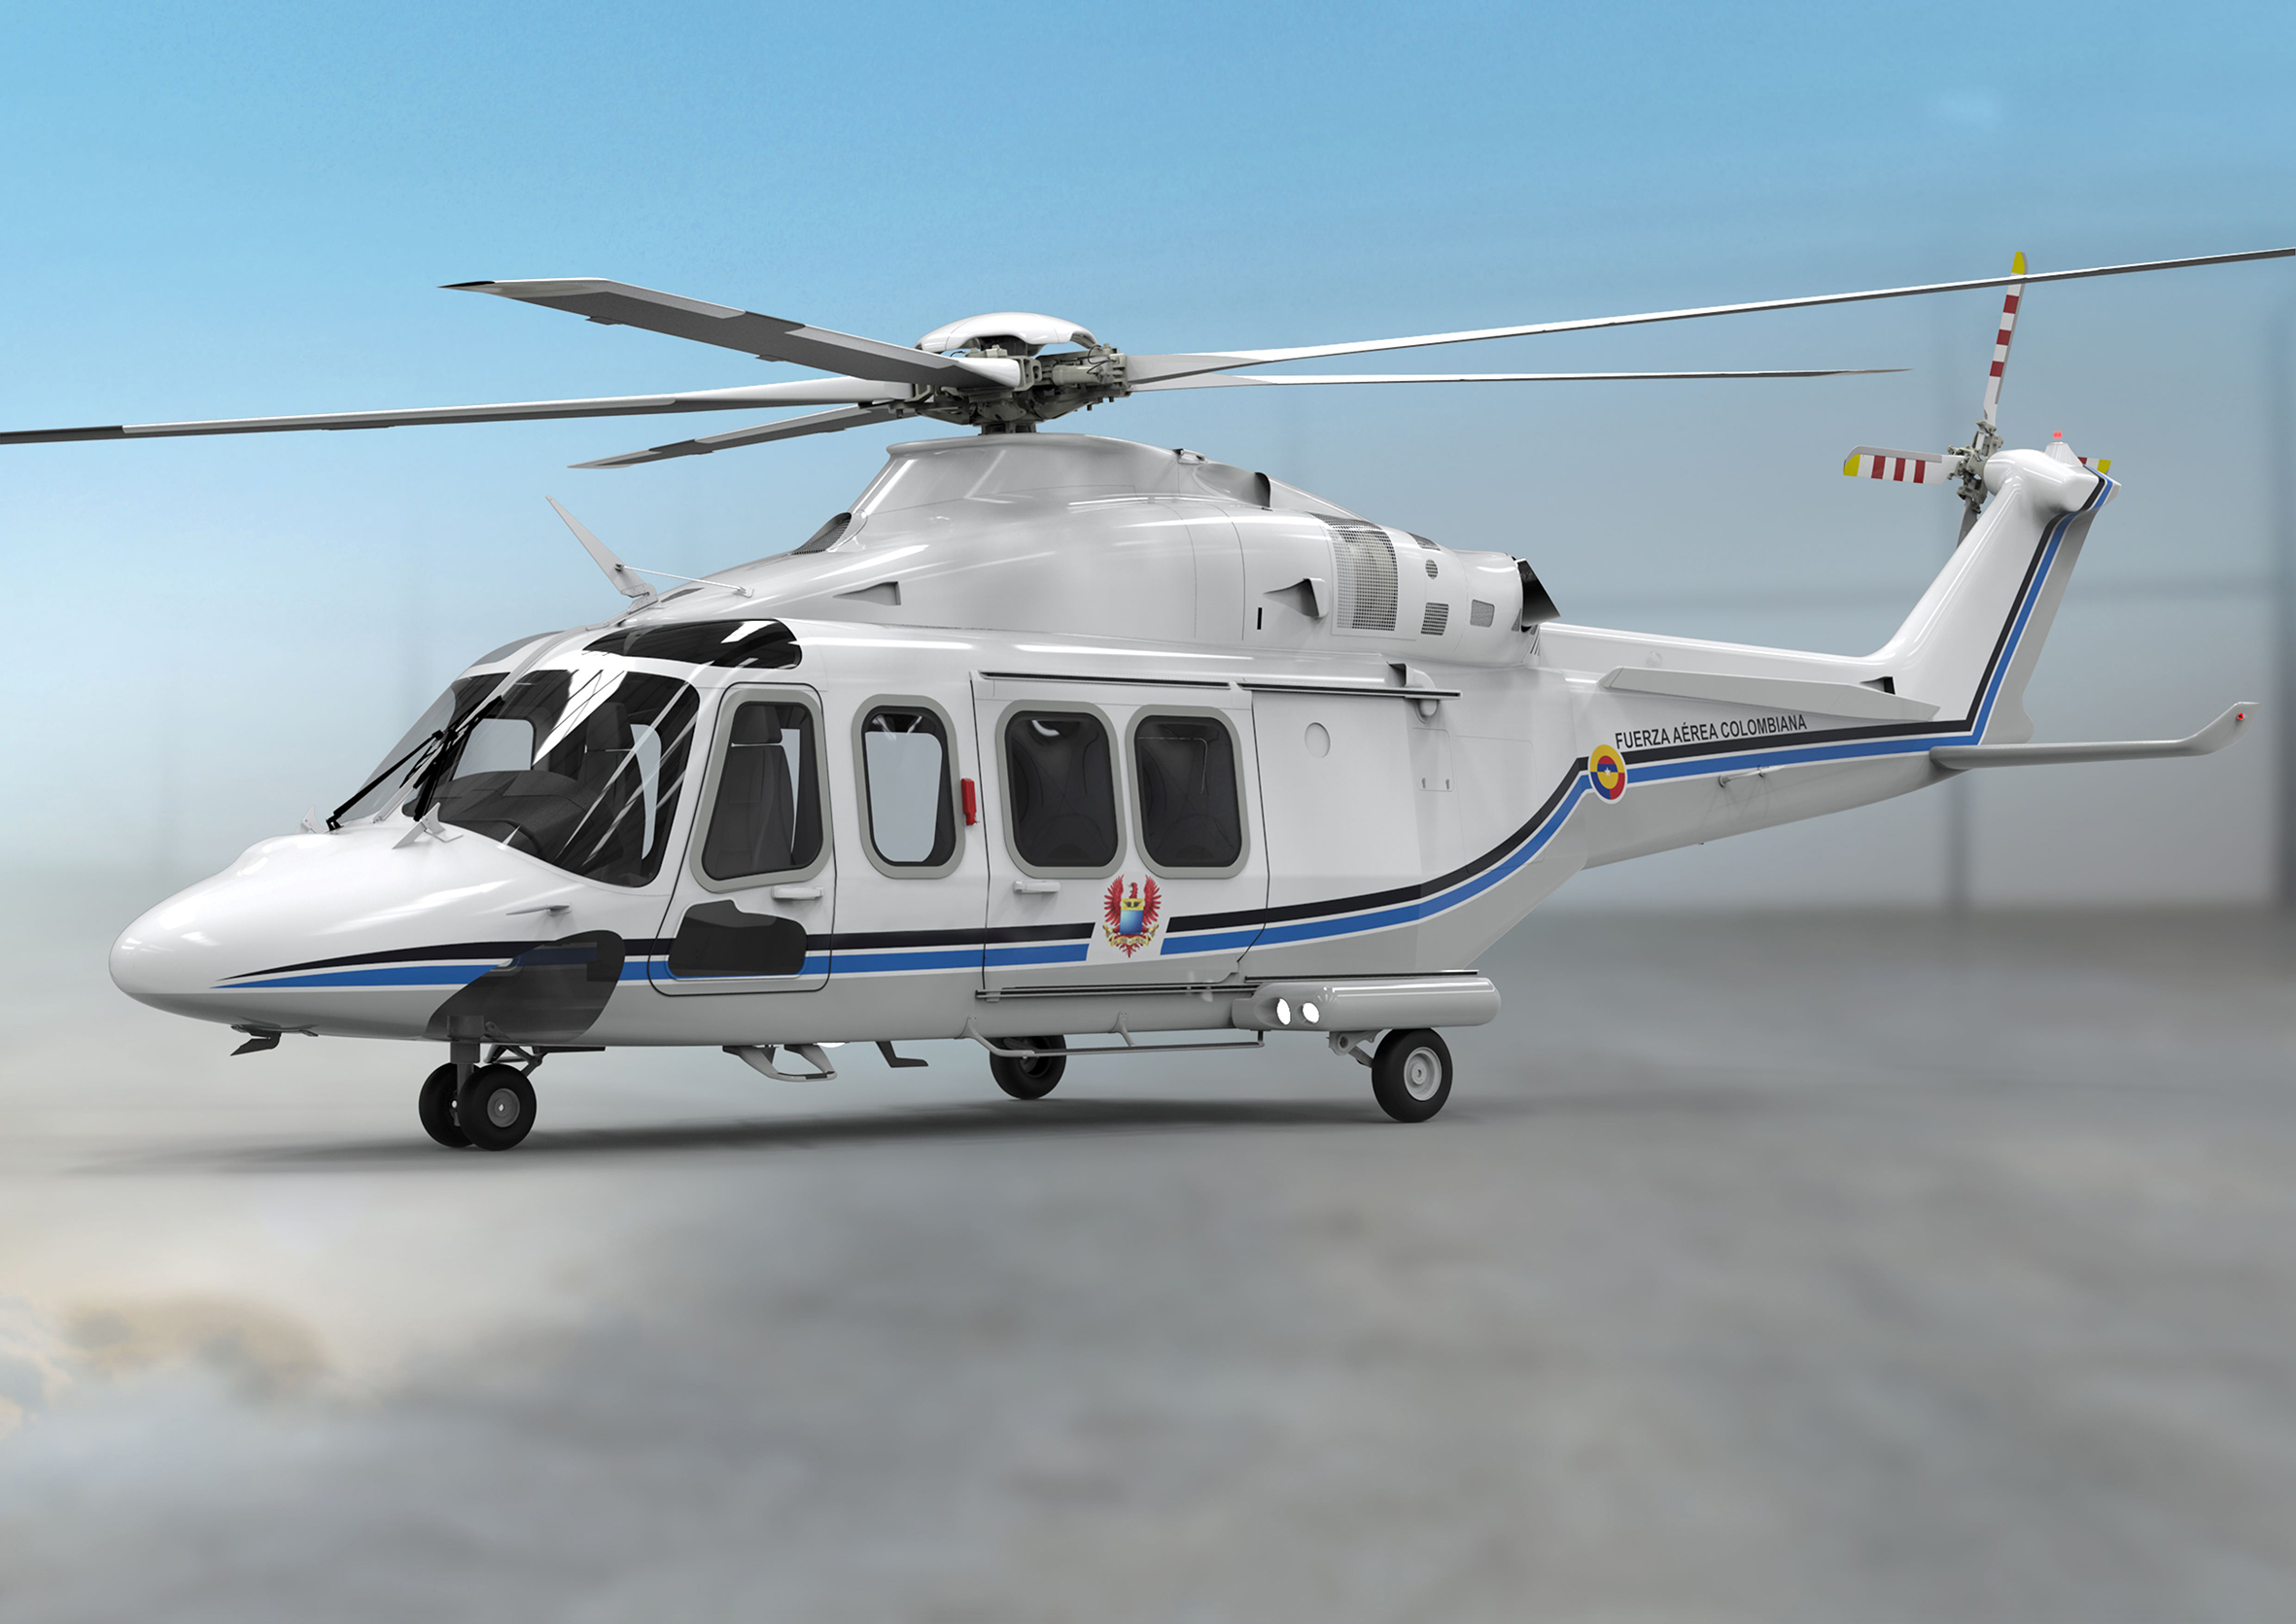 AW139 will be Colombia’s new Presidential helicopter